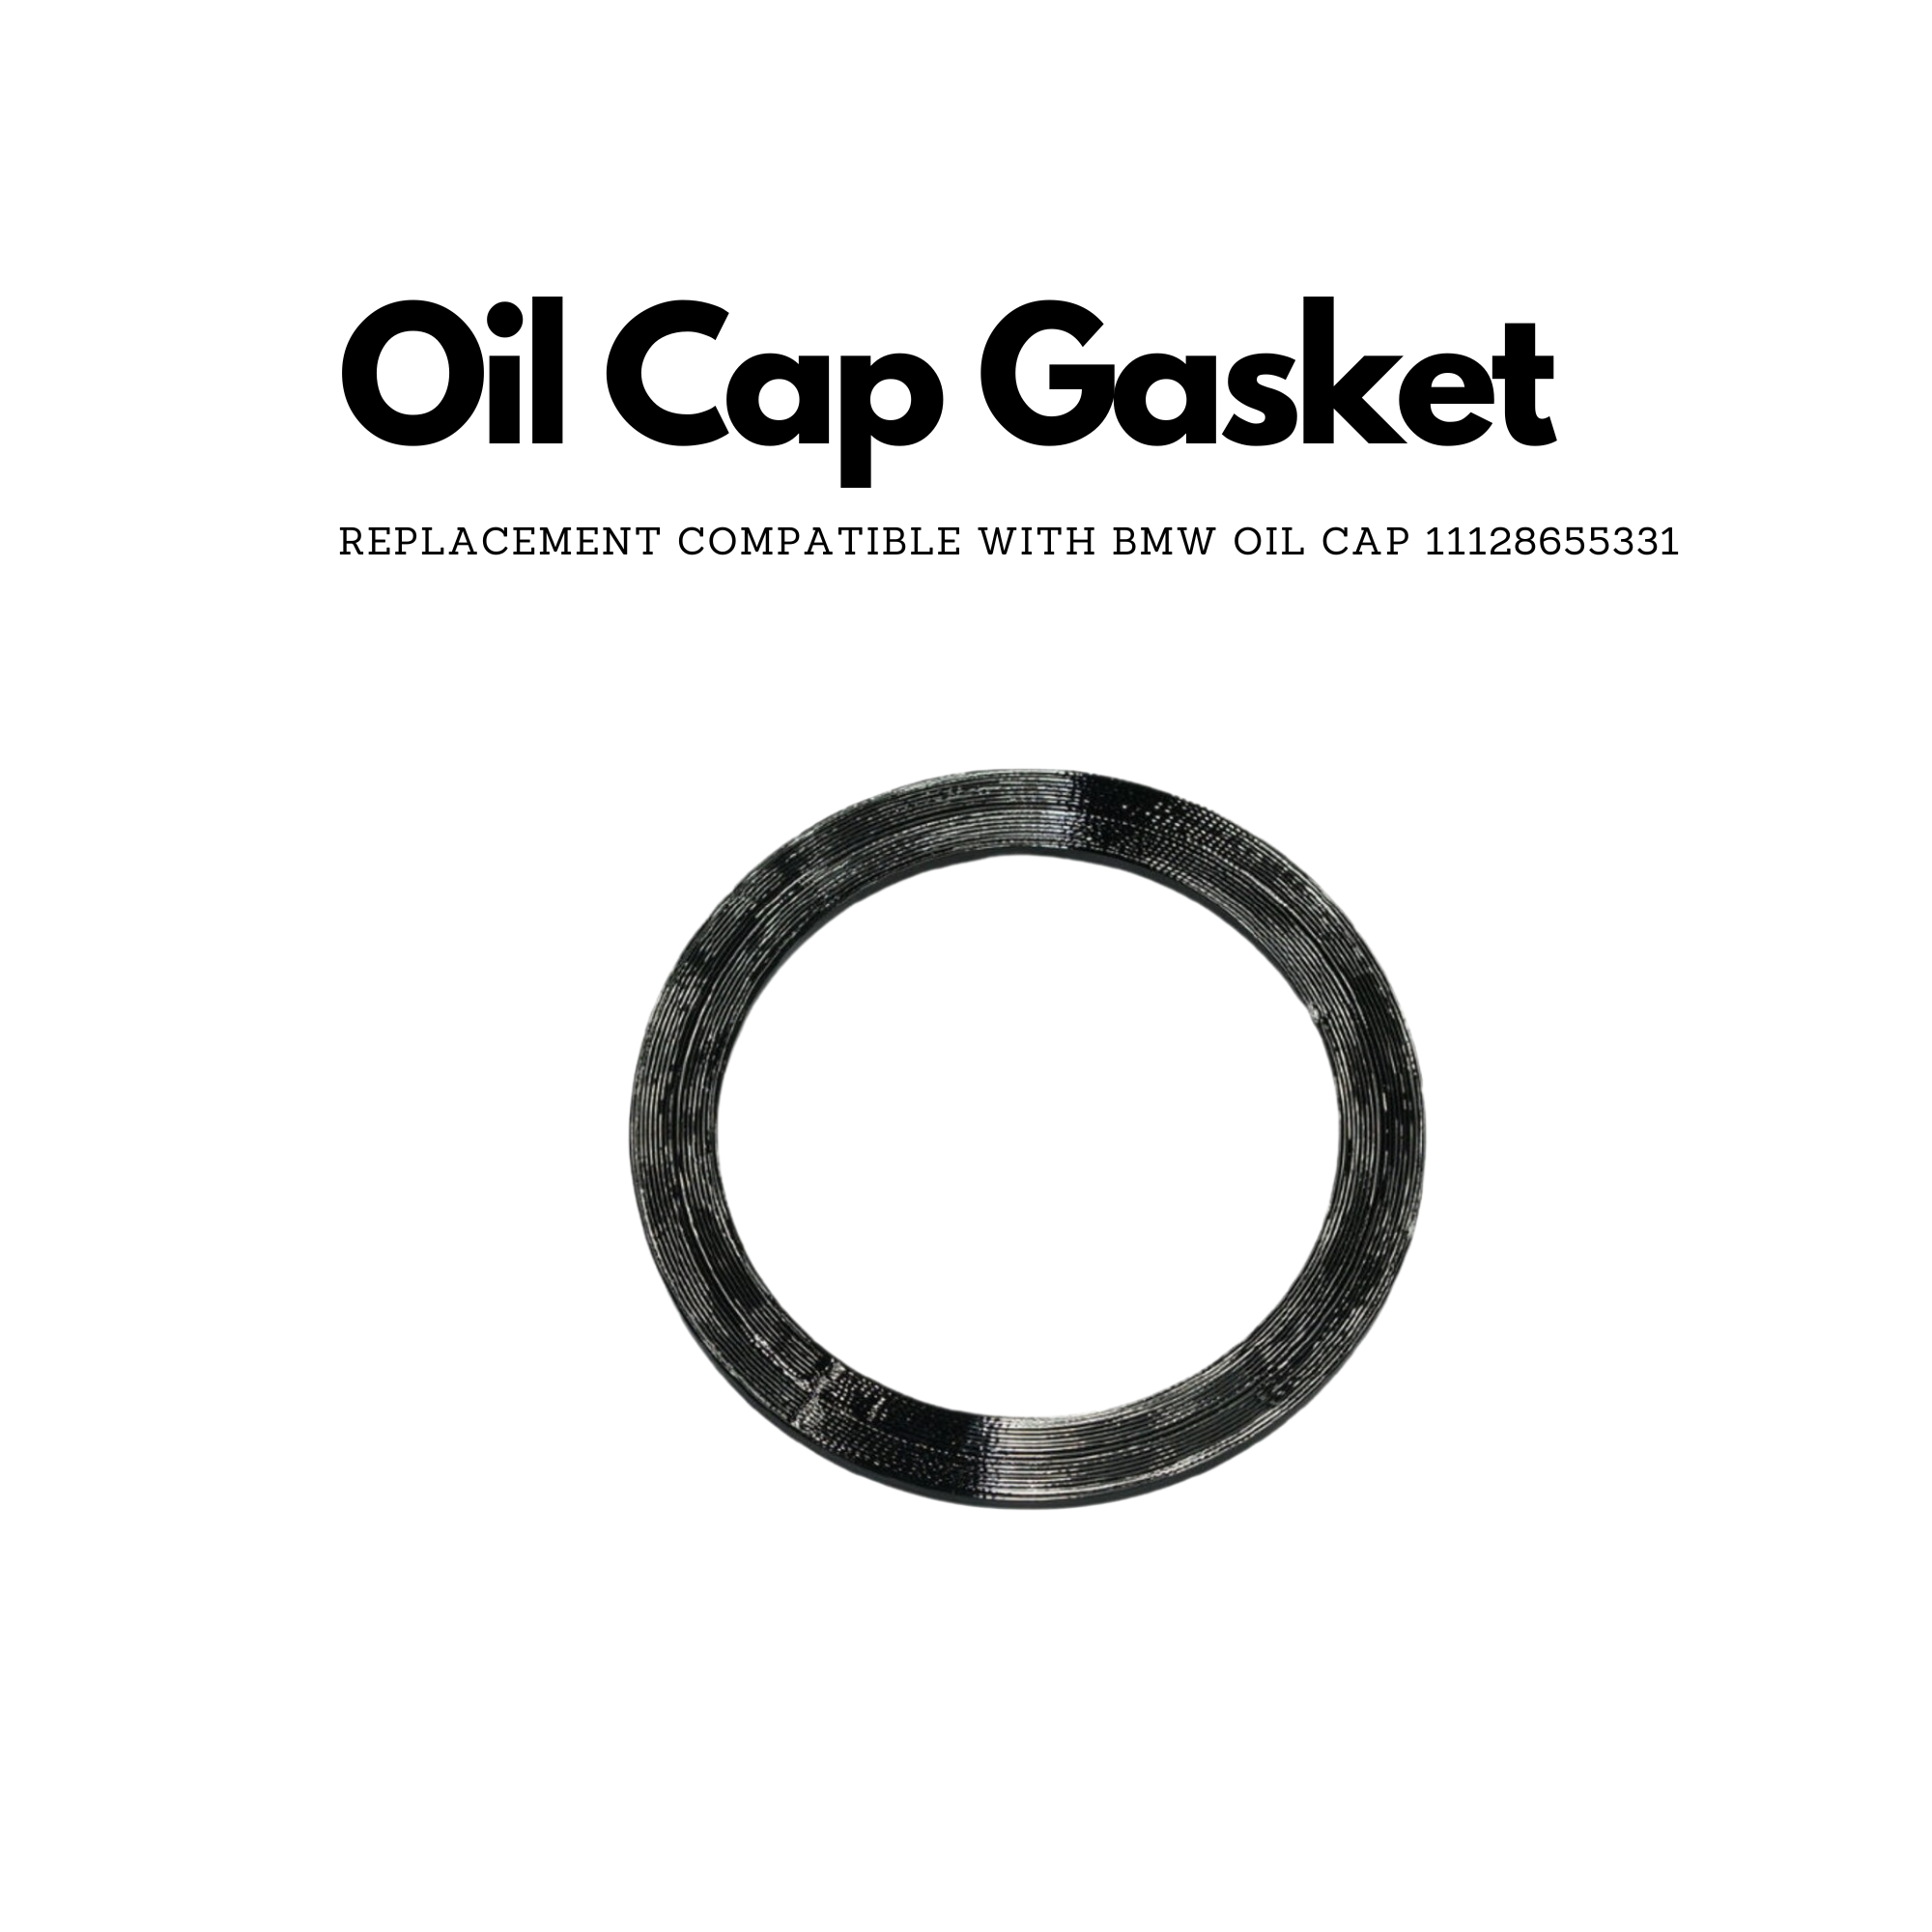 Oil Cap Gasket Upgrade Replacement compatible with BMW Oil Cap 11128655331